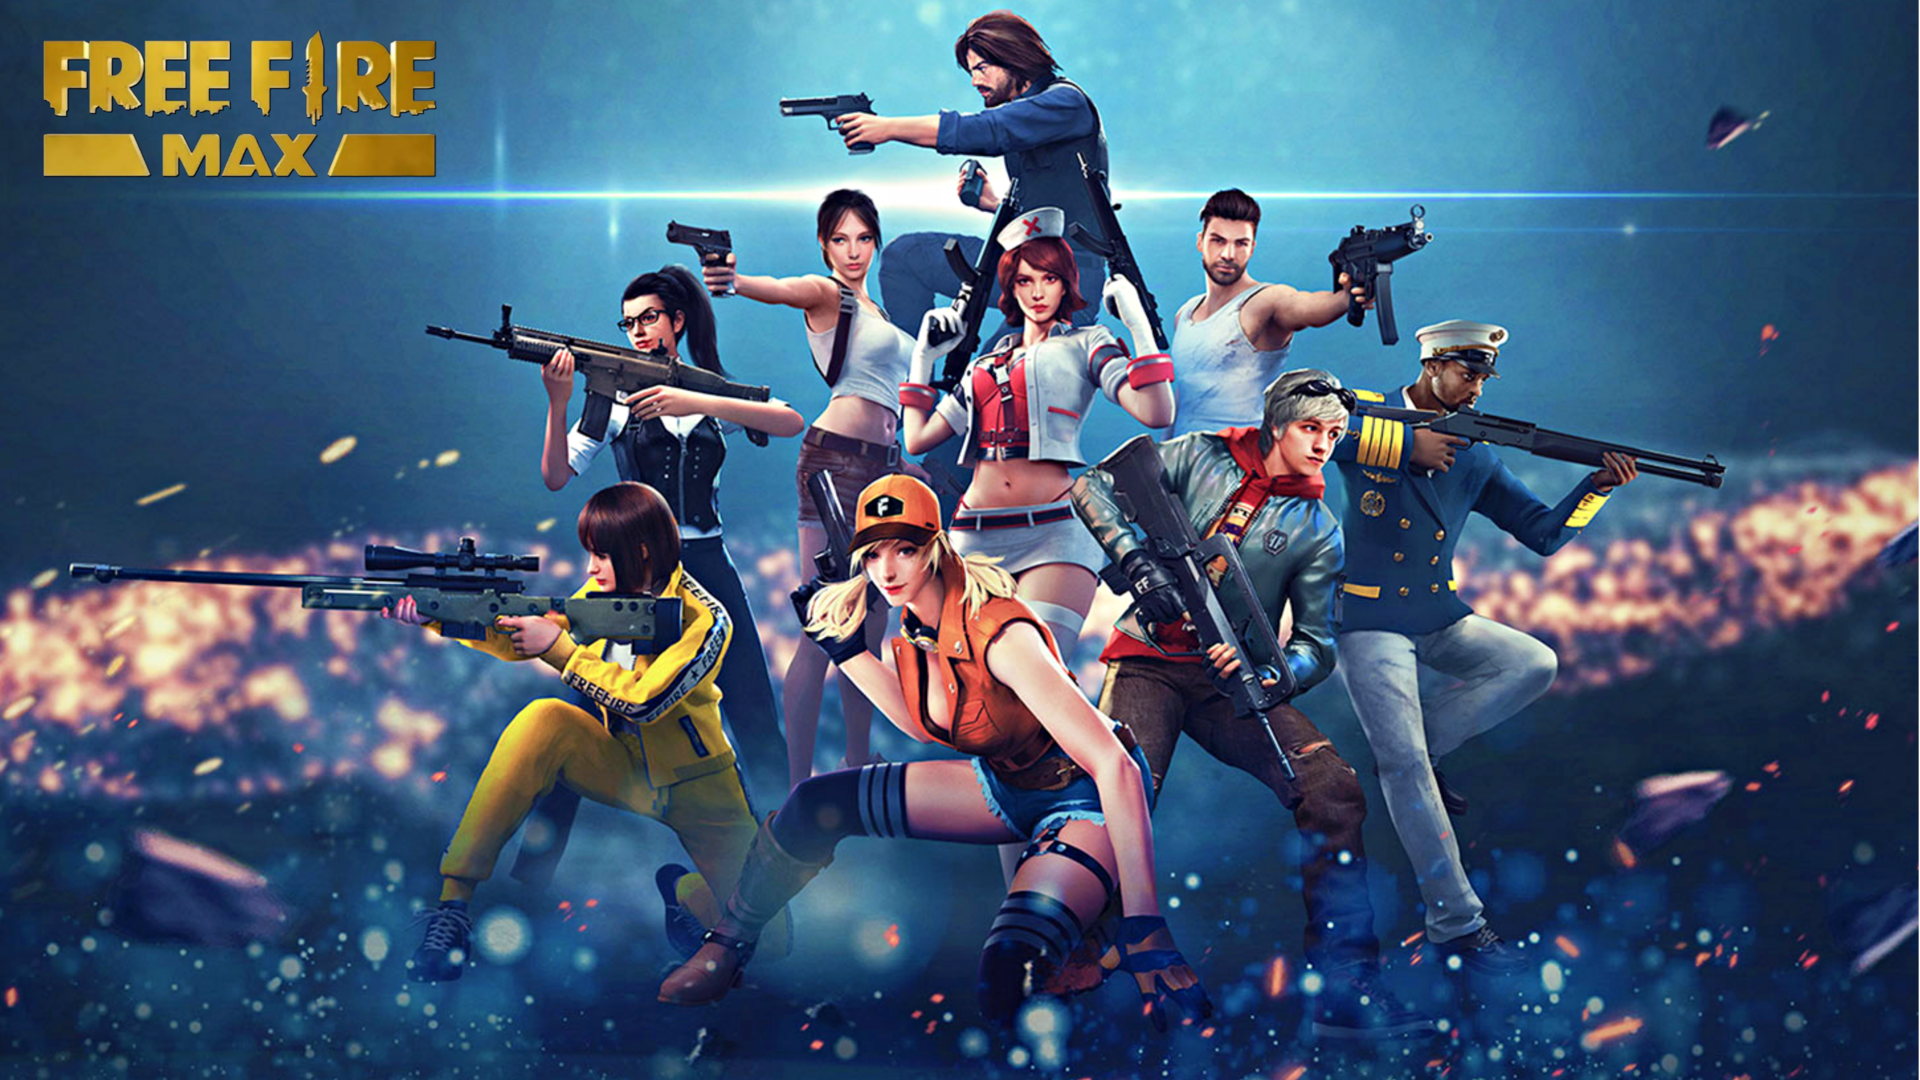 Free Fire MAX's March 4 codes: Collect free in-game bonuses